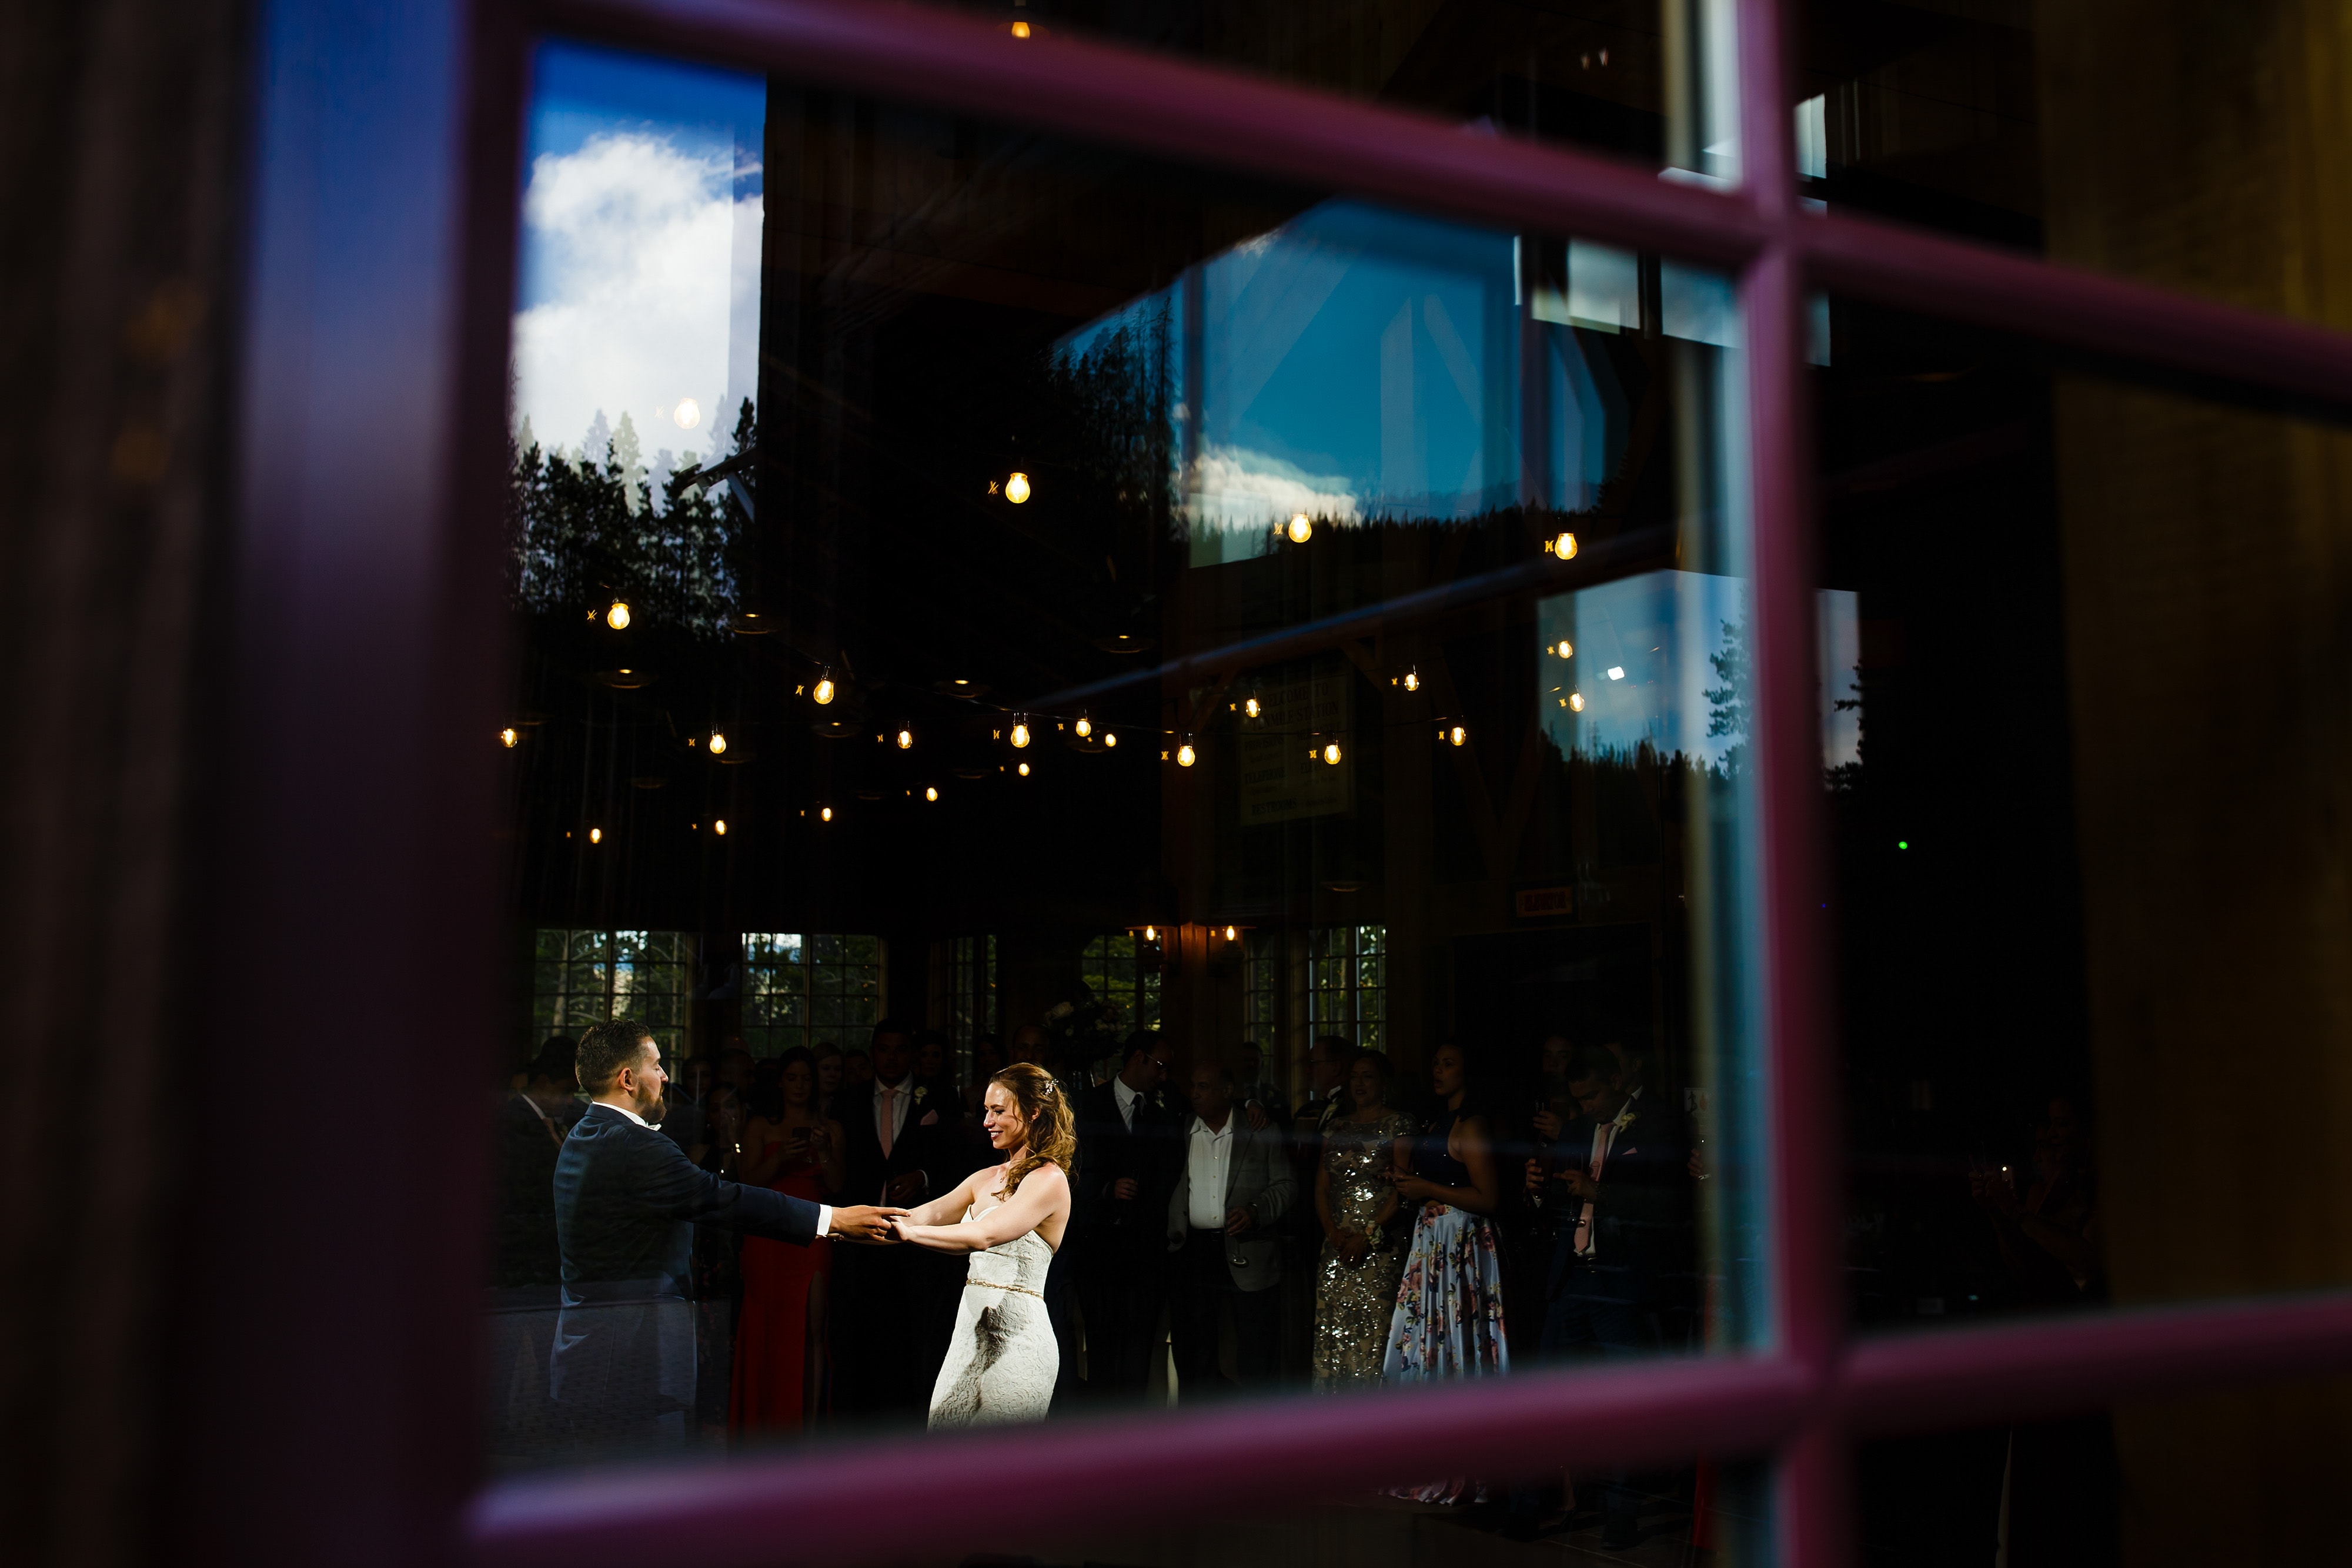 Sharon and Nick during their first dance at their TenMile Station wedding in Breckenridge